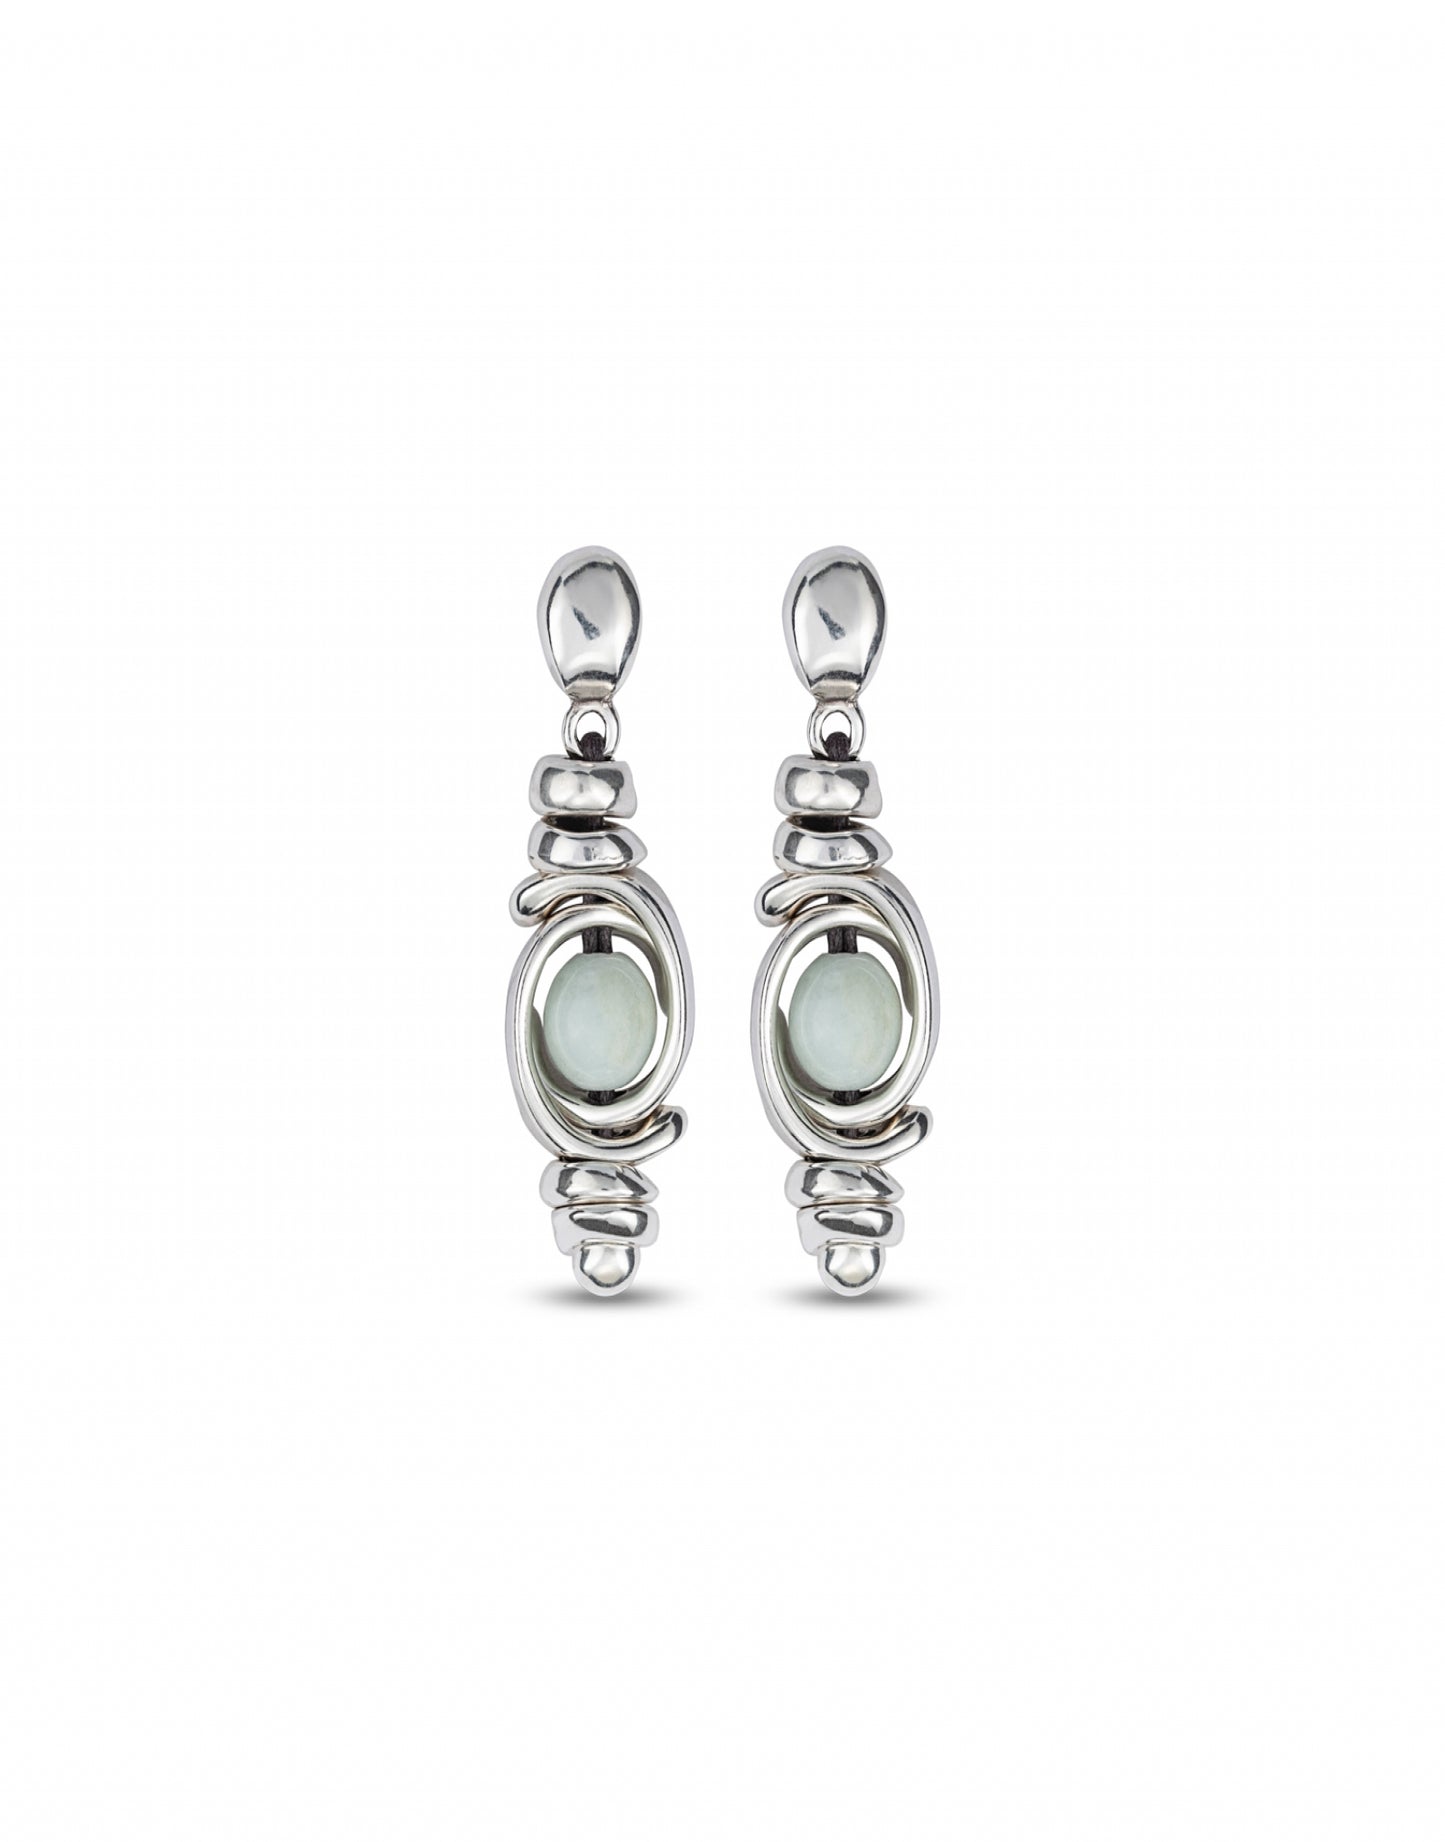 UNO DE 50 UNOde50 - Silver Planets Earrings available at The Good Life Boutique